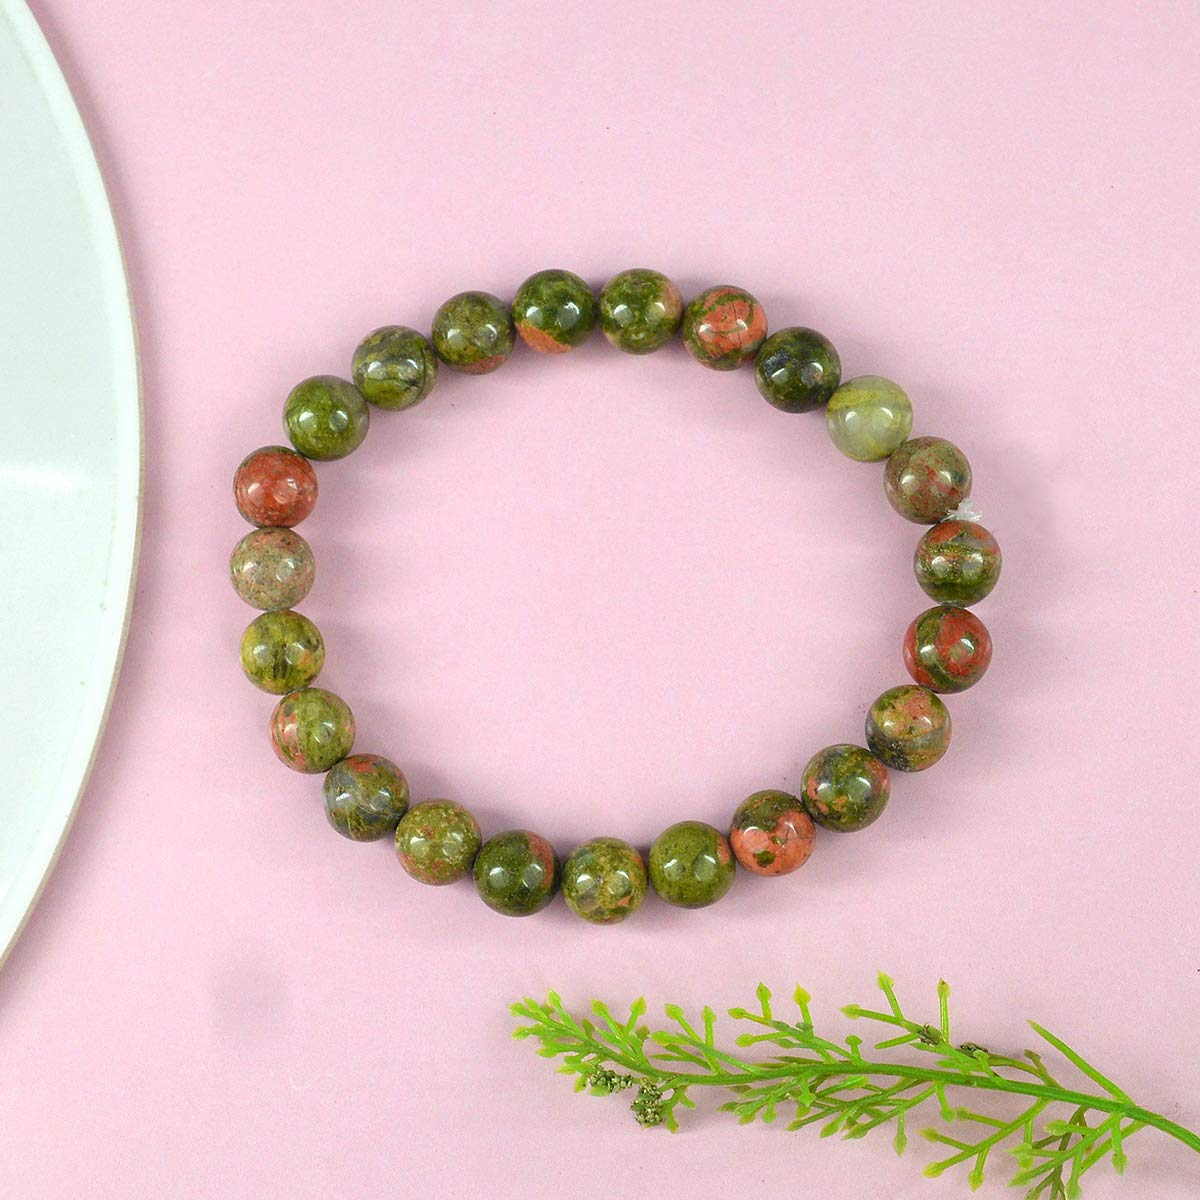 Reshamm Pre-Energized Unisex Premium Unakite Natural Crystal Stone Bracelet for Heart Chakra Alignment, Compassion and Inner Peace